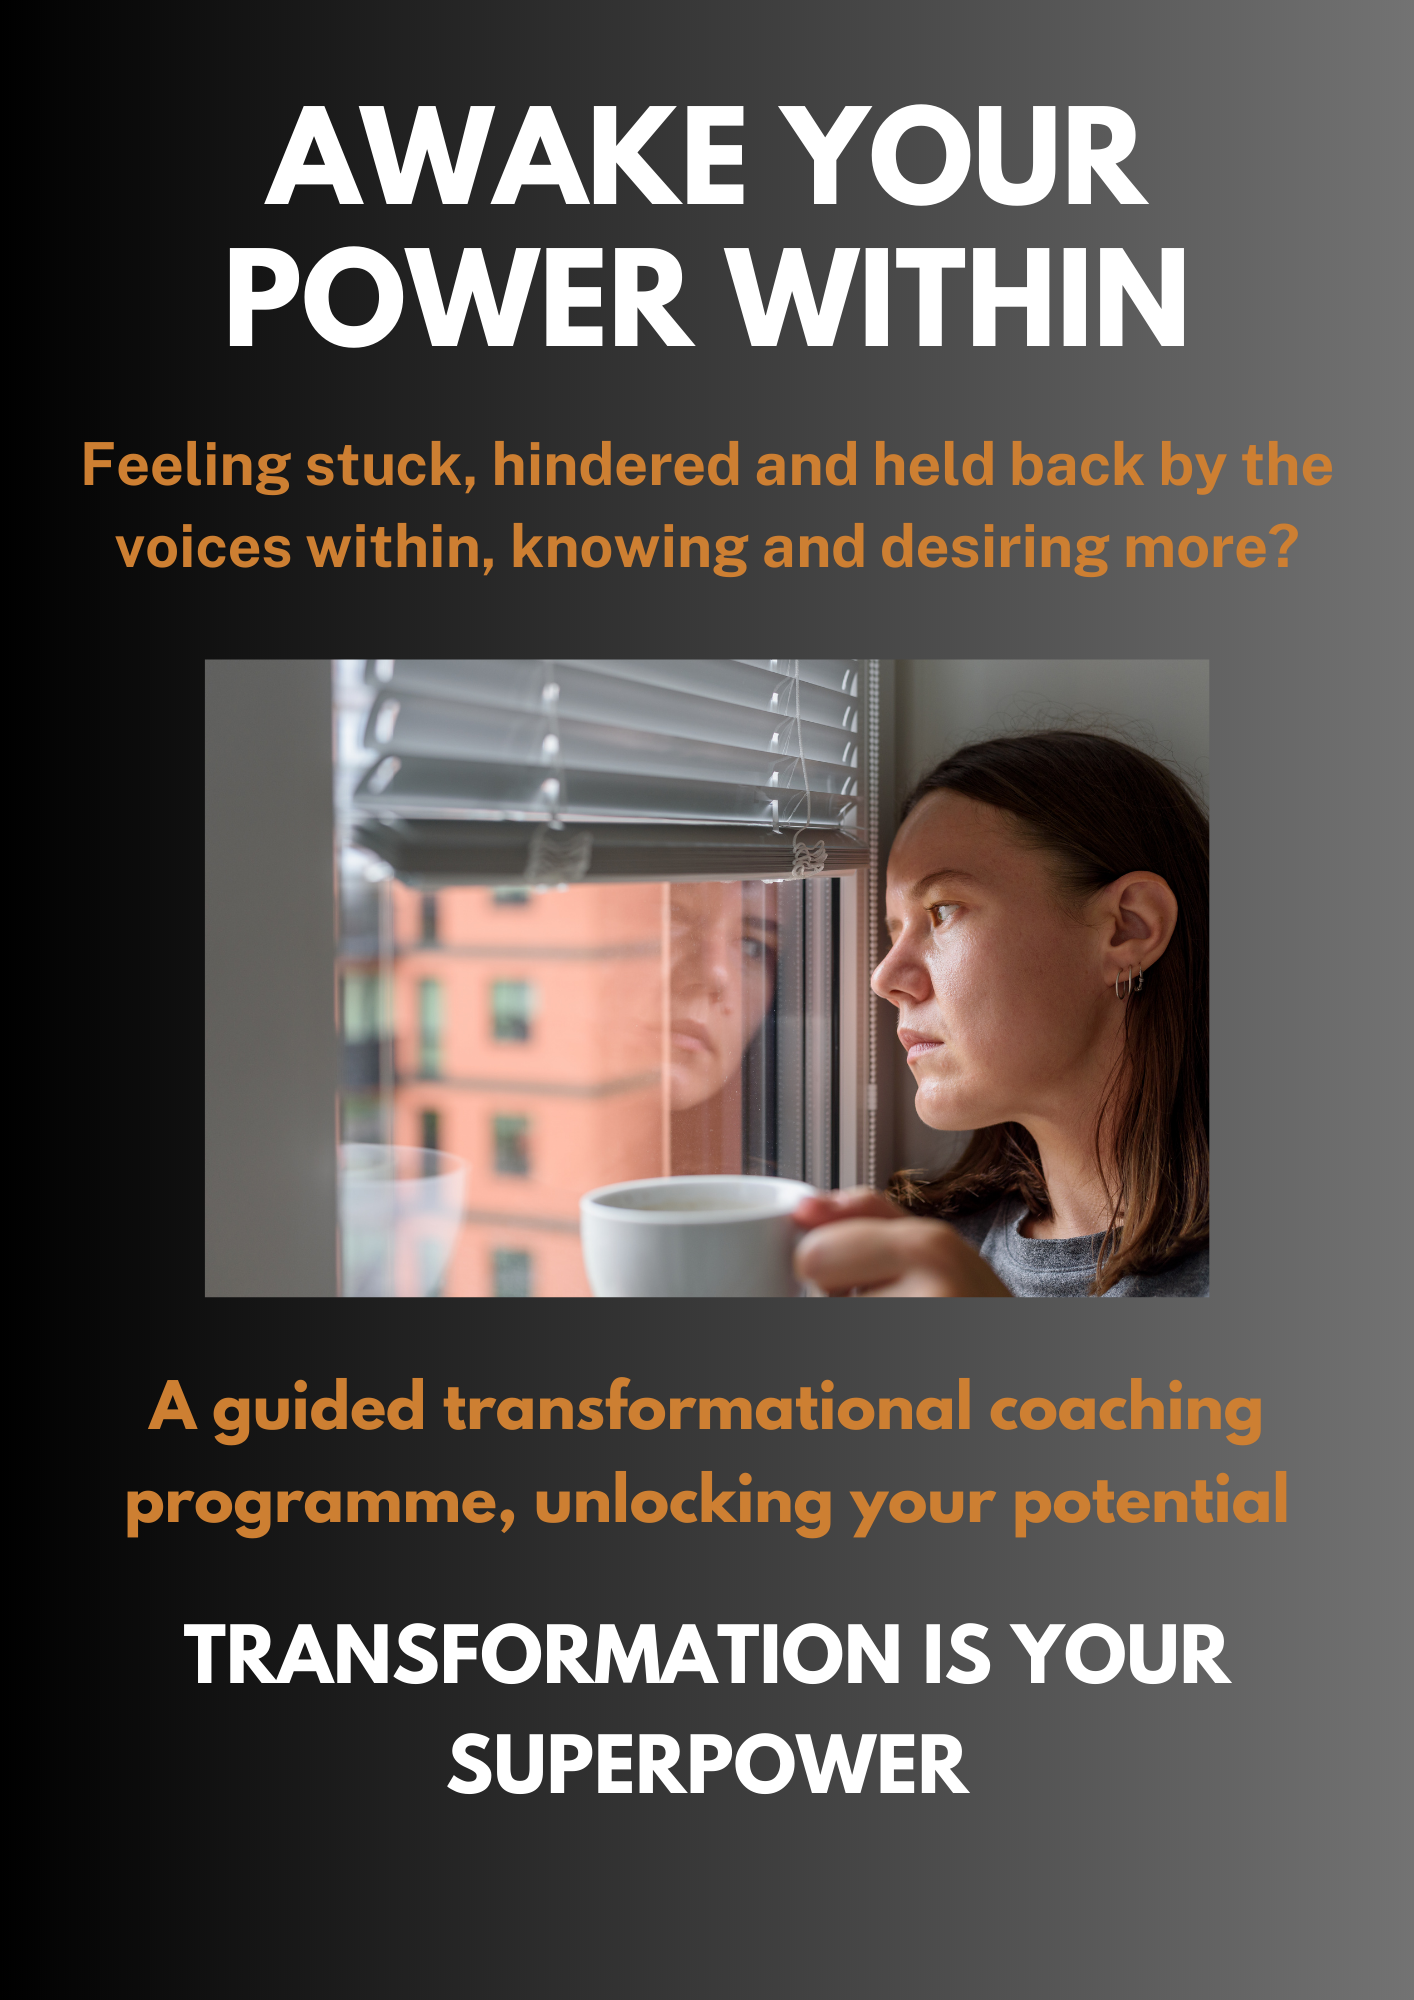 Discover the Power within you  A guided transformational coaching journey